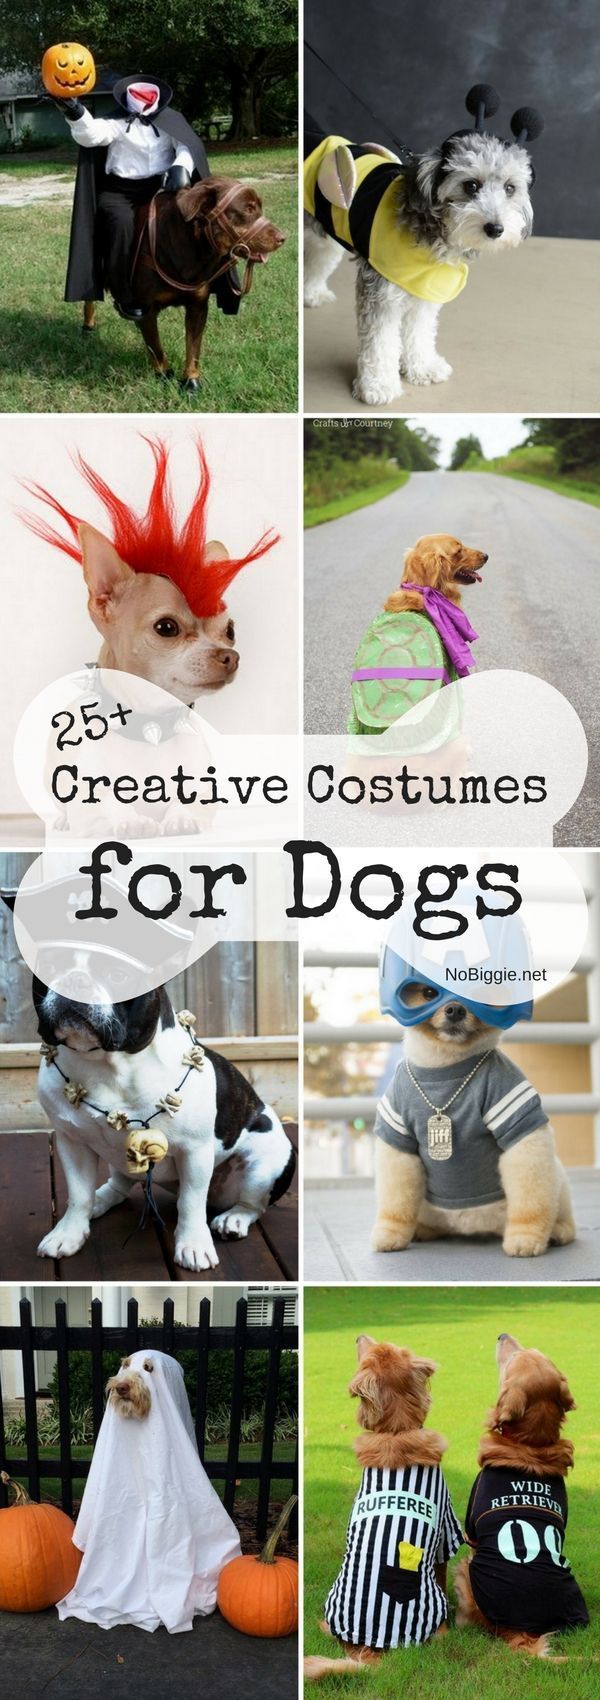 25+ Creative Costumes for Dogs - 25+ Creative Costumes for Dogs -   16 diy Dog costume ideas